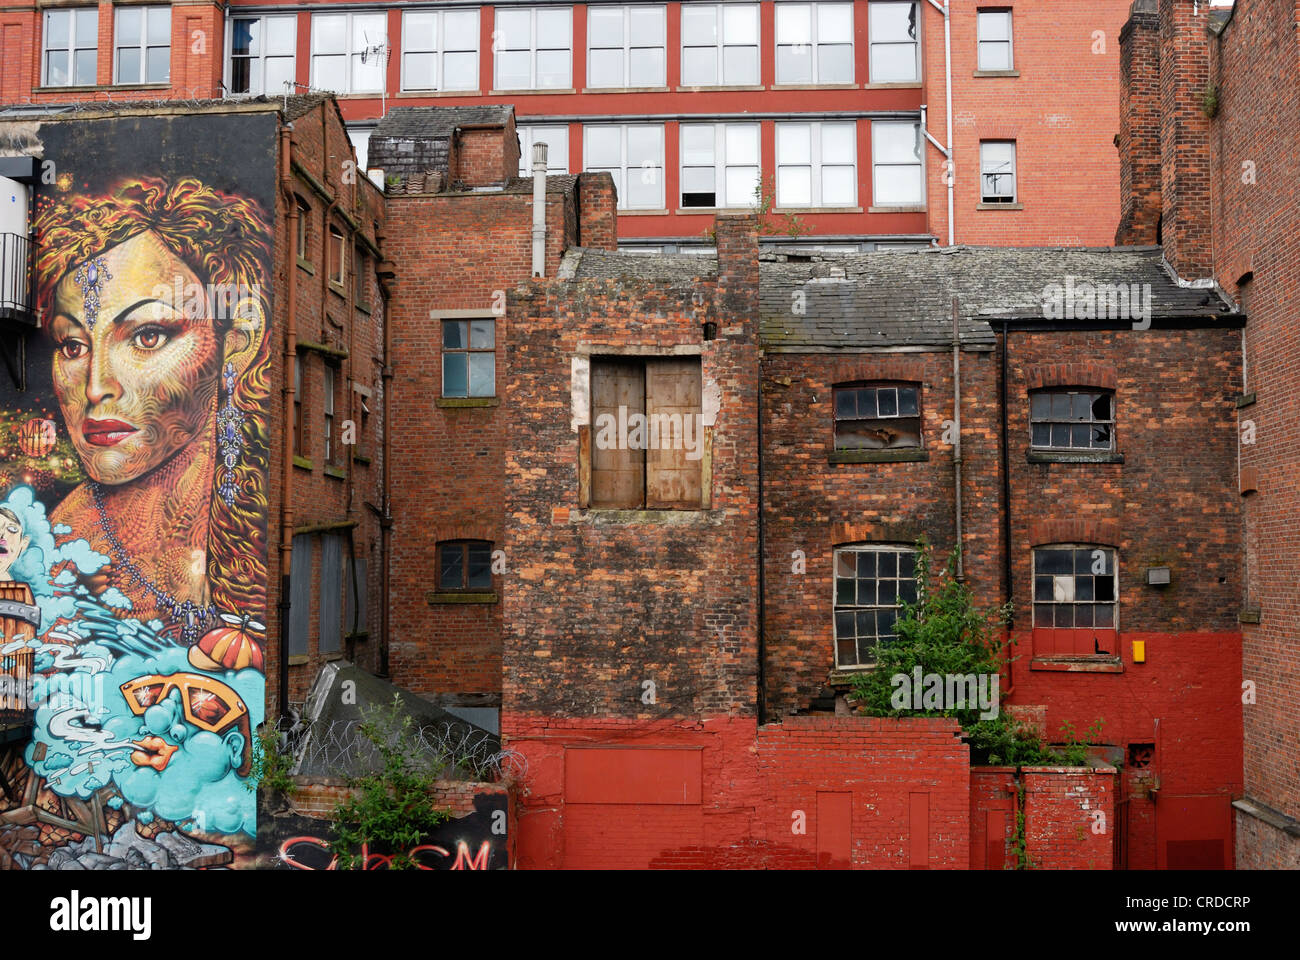 Street art on the side of a building with decaying semi-derelict buildings contrasting with a modern building behind. Stock Photo